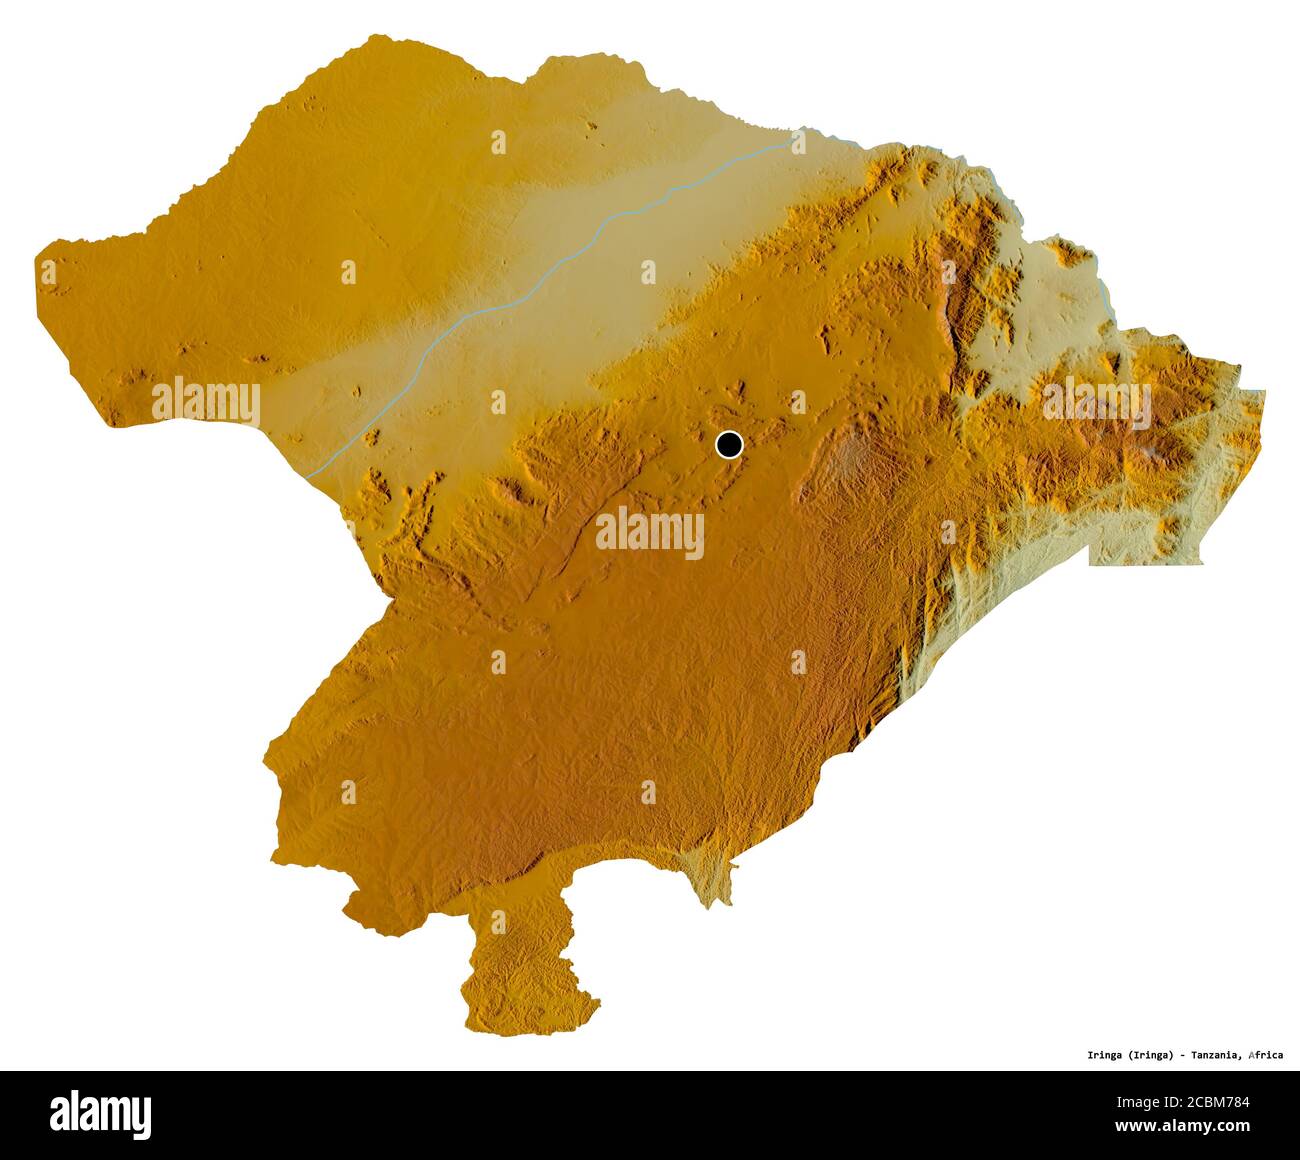 Shape of Iringa, region of Tanzania, with its capital isolated on white background. Topographic relief map. 3D rendering Stock Photo